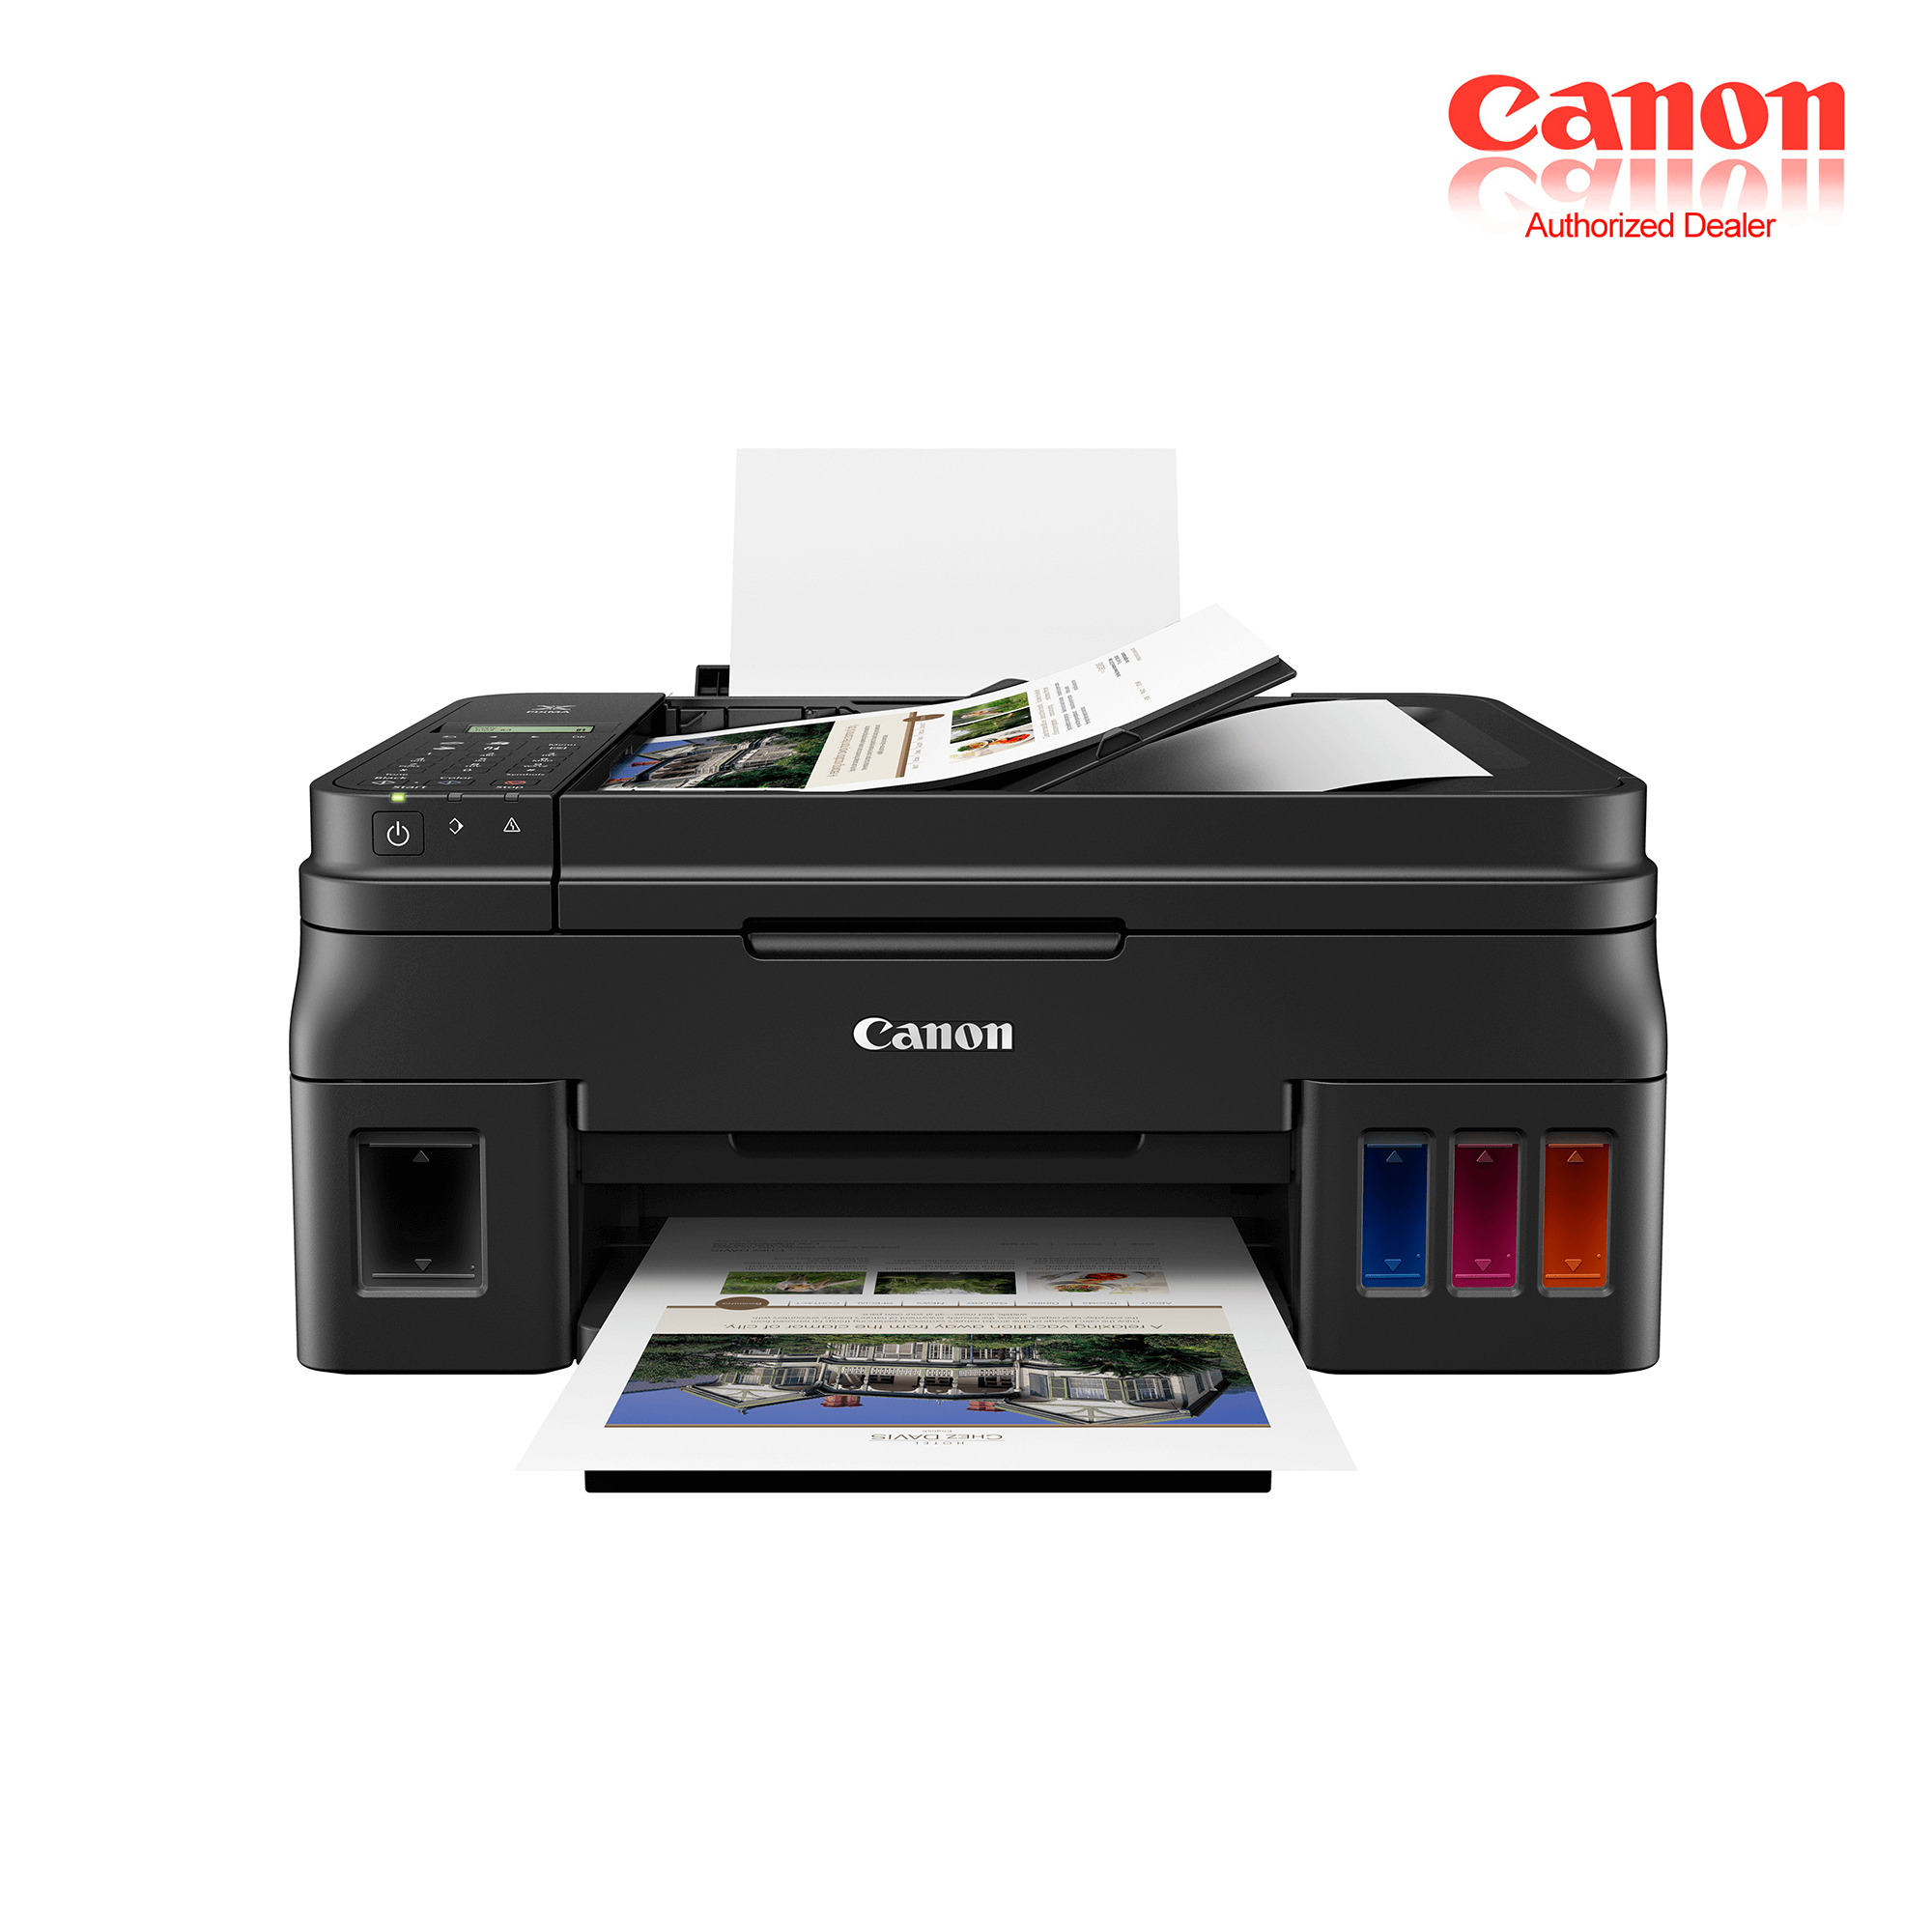 Canon PIXMA G4010 Ink Tank Wireless 3in1 Printer with Fax ADF